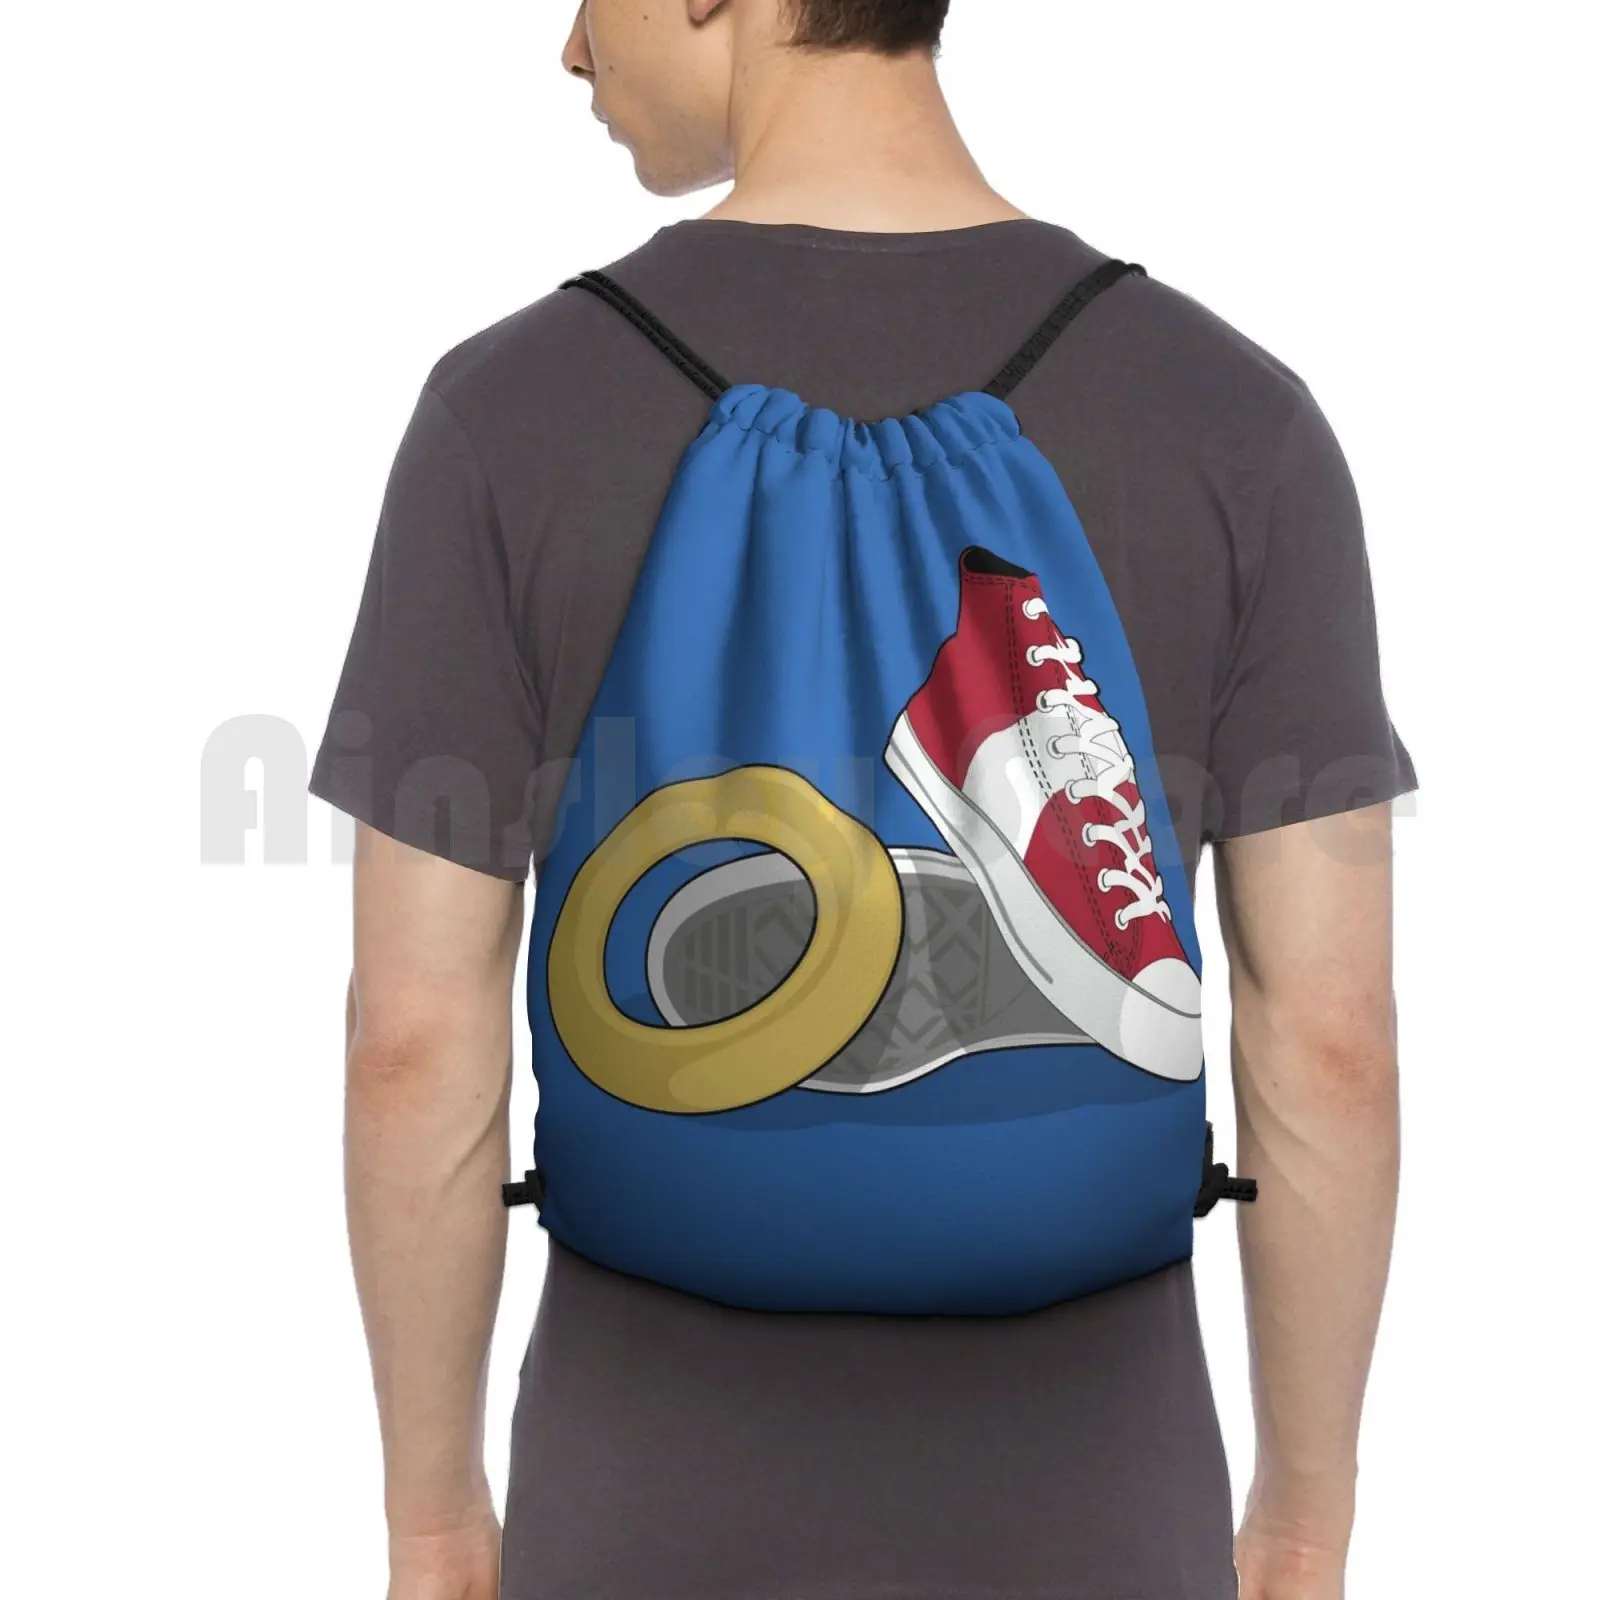 

Backpack Drawstring Bag Riding Climbing Gym Bag Hedgehog Ring Video Game Computer Game Sneakers Trainers Gaming Master